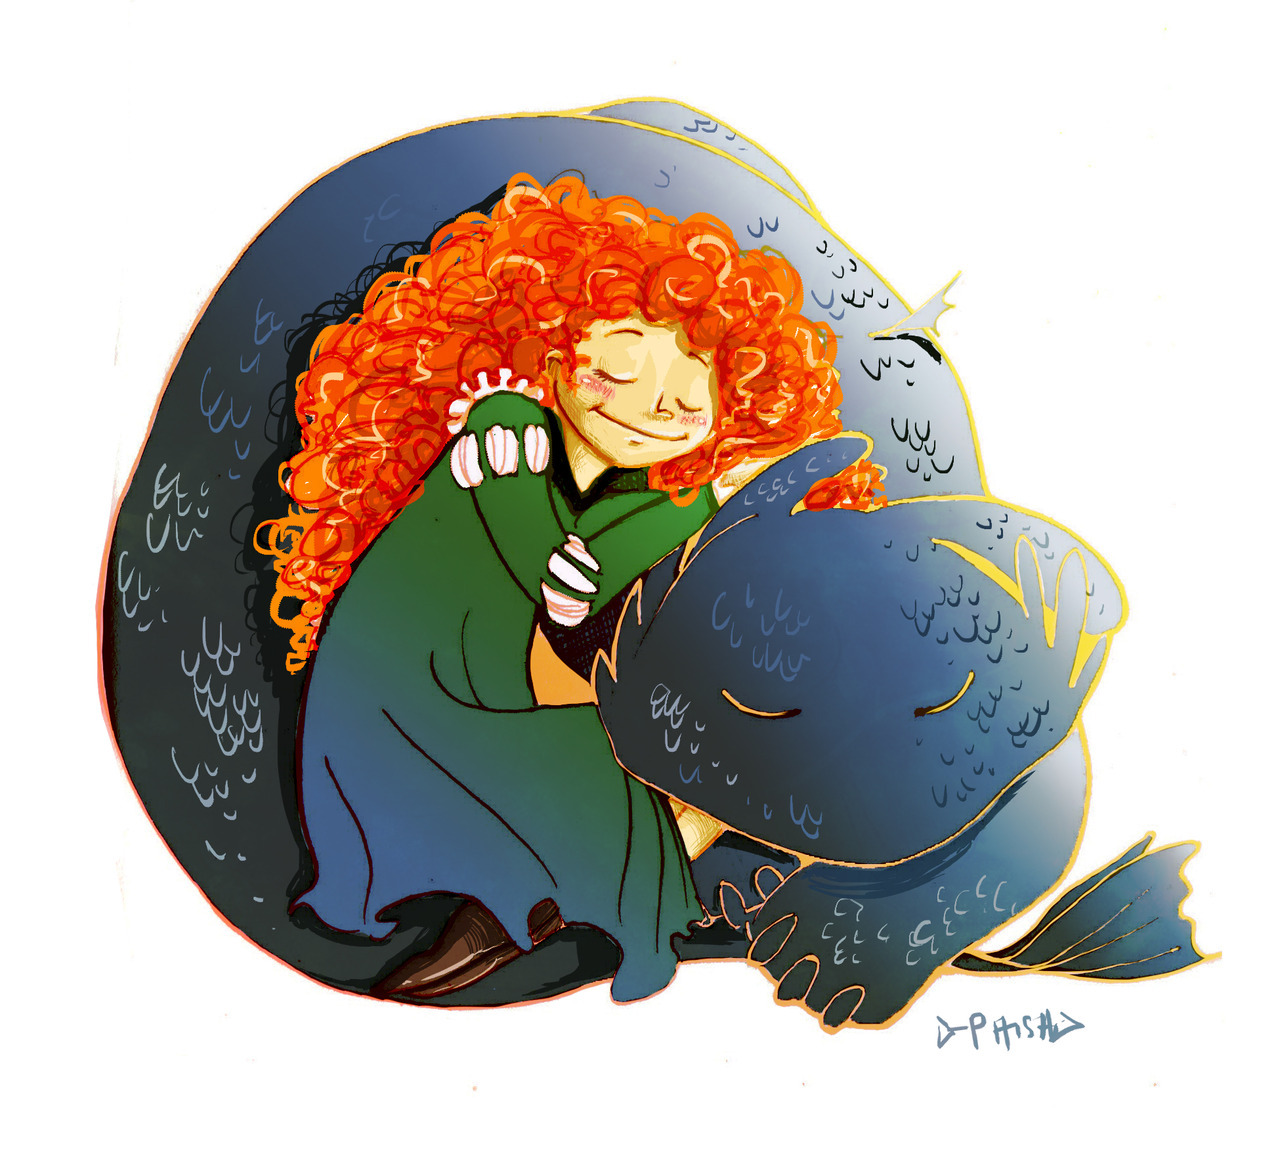 Merida + Toothless~ Both of my fave animated movies of all time :DArt blog here 